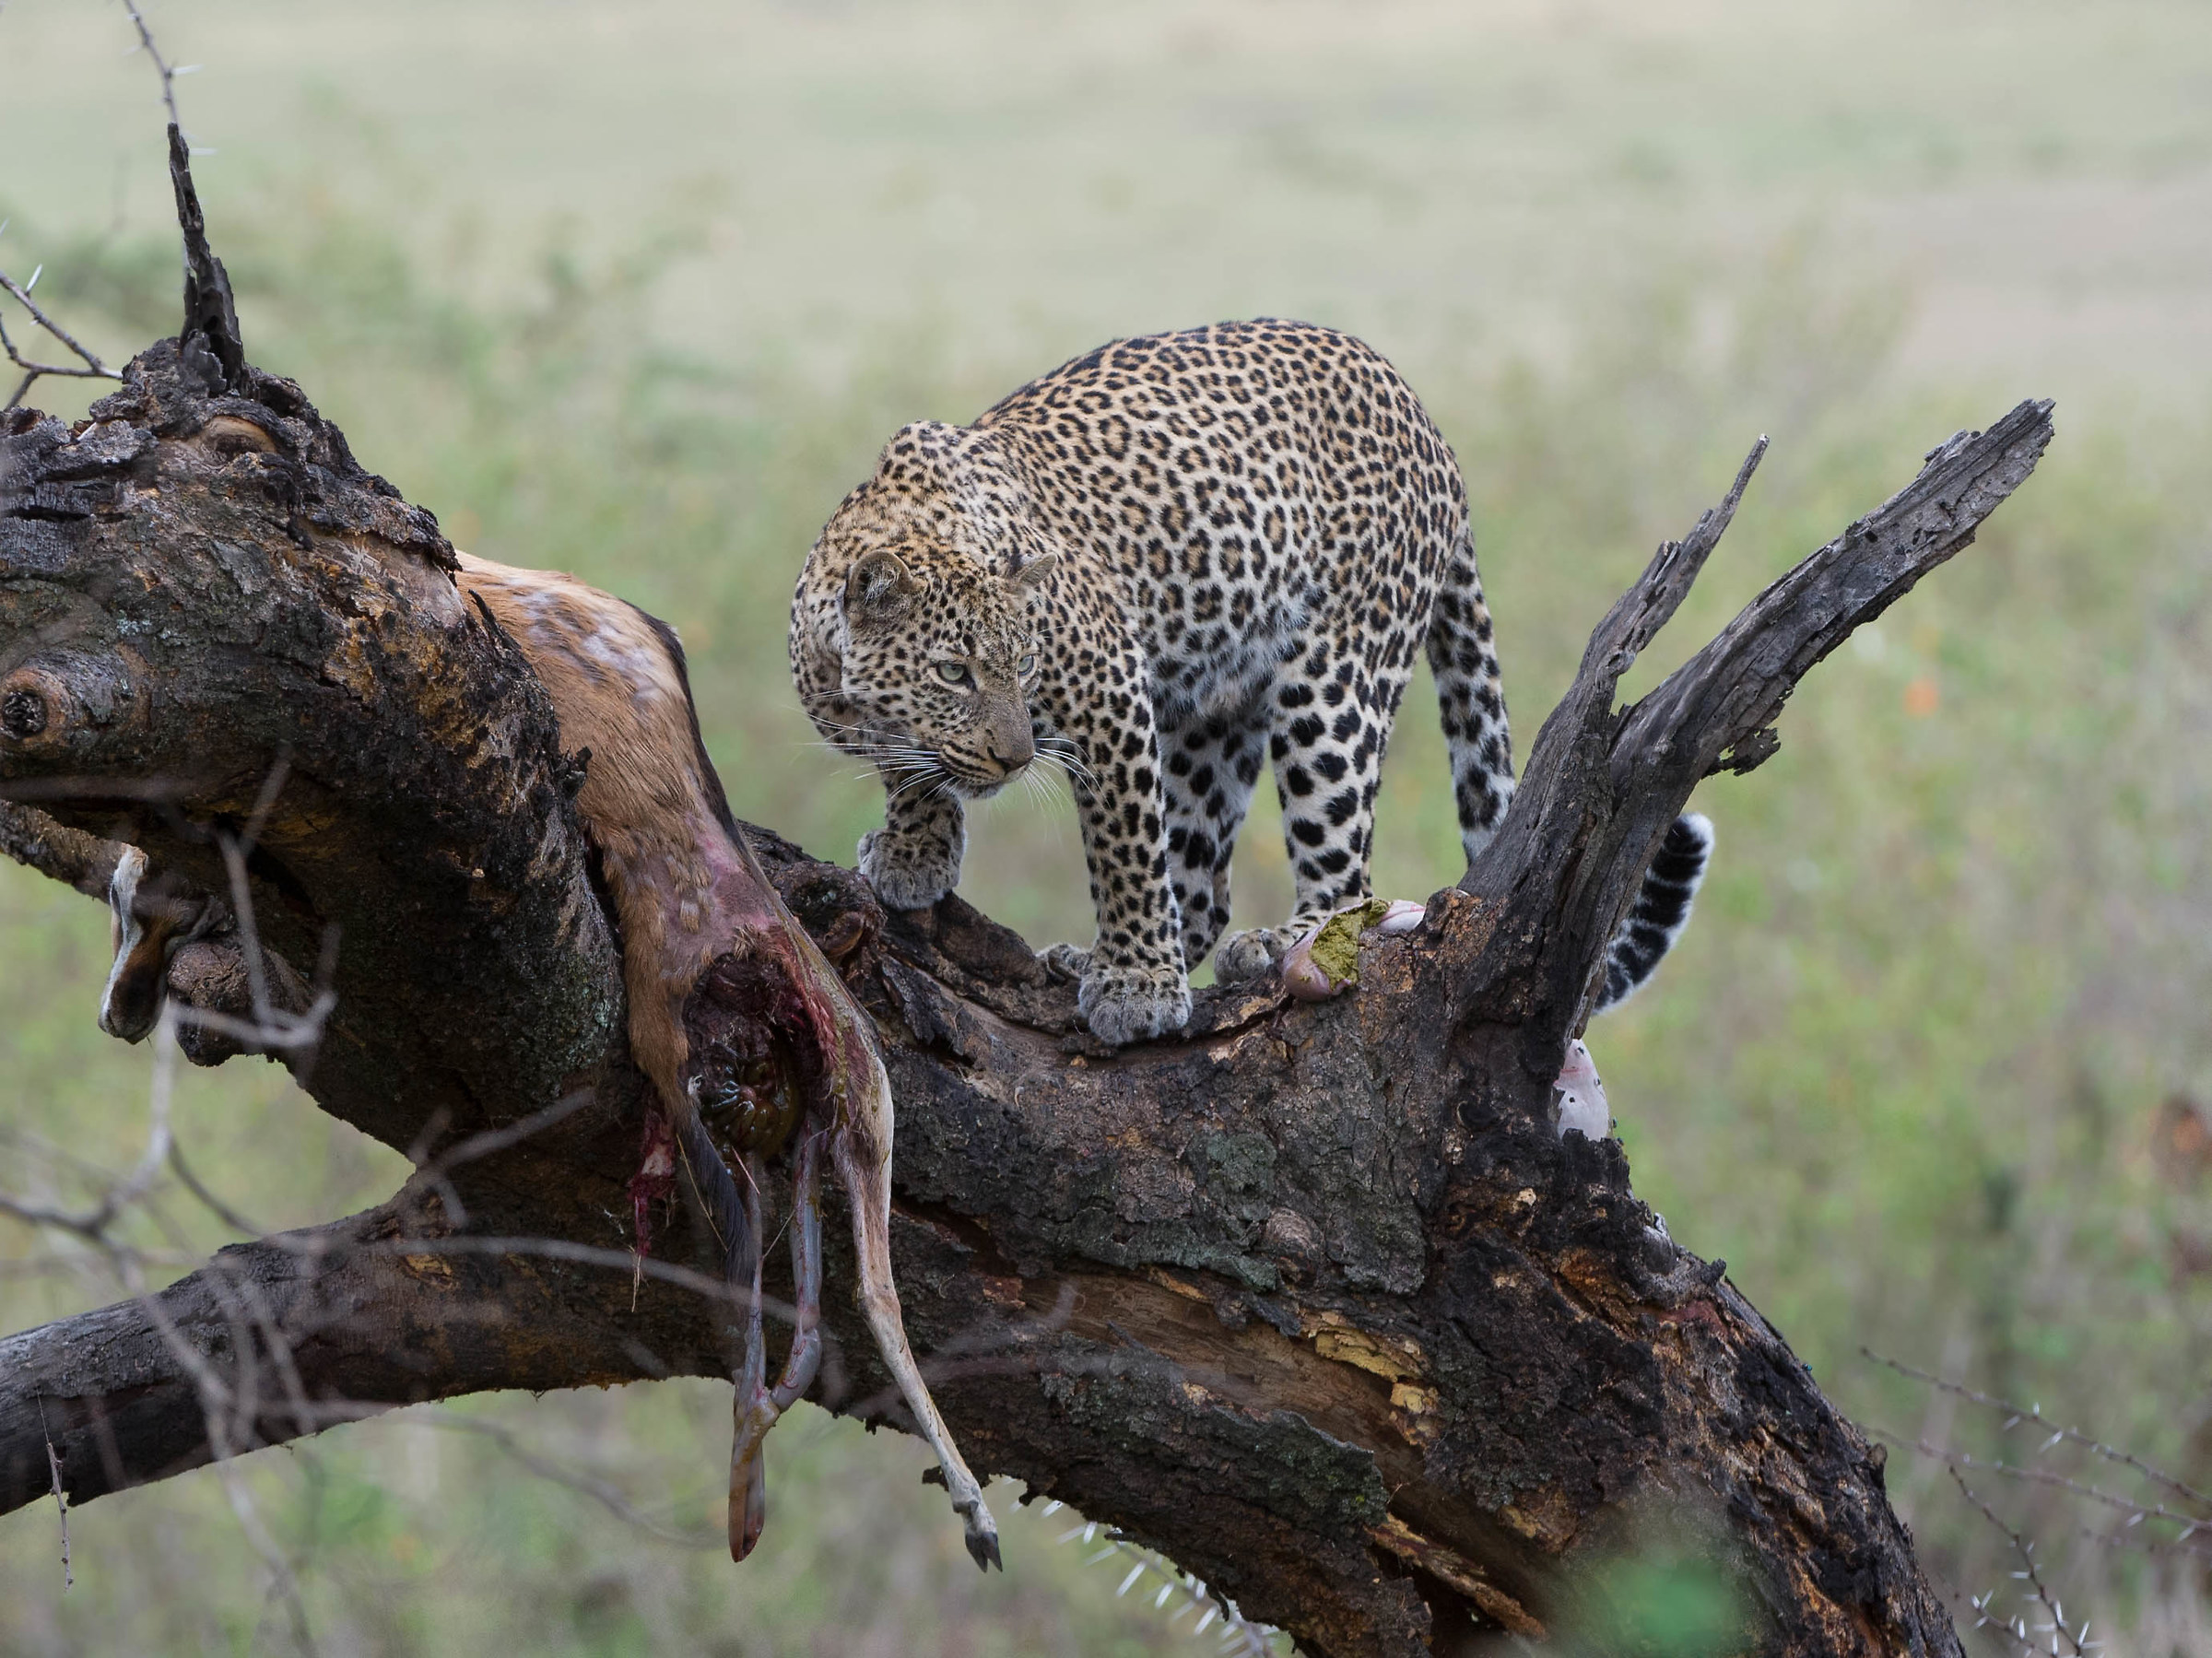 the leopard and its prey...